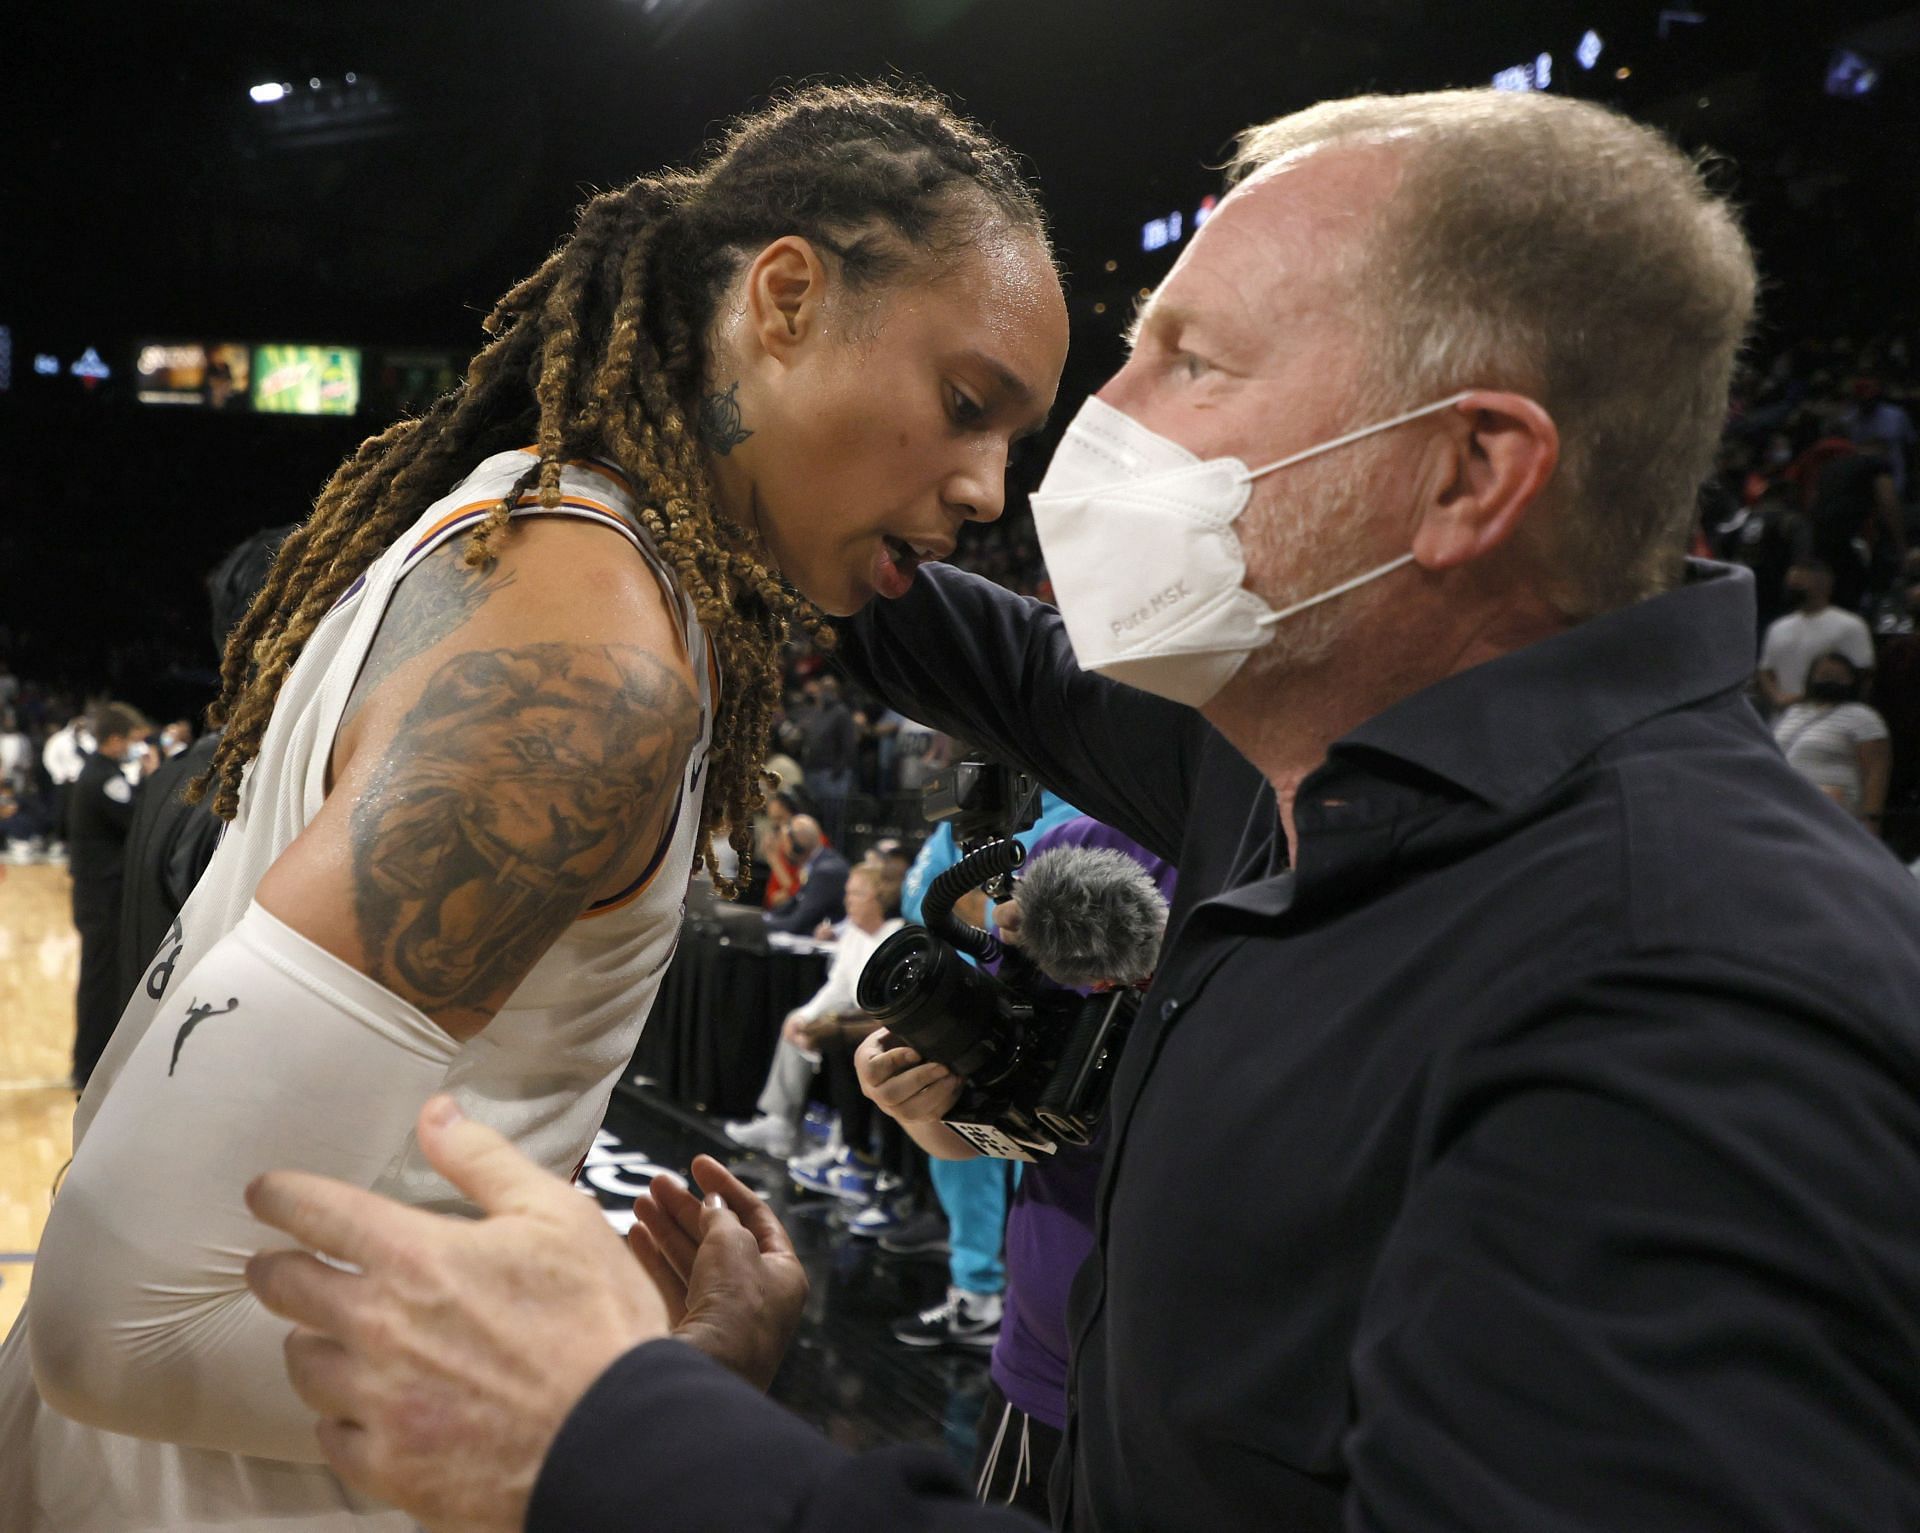 Griner seems to be doing fine.